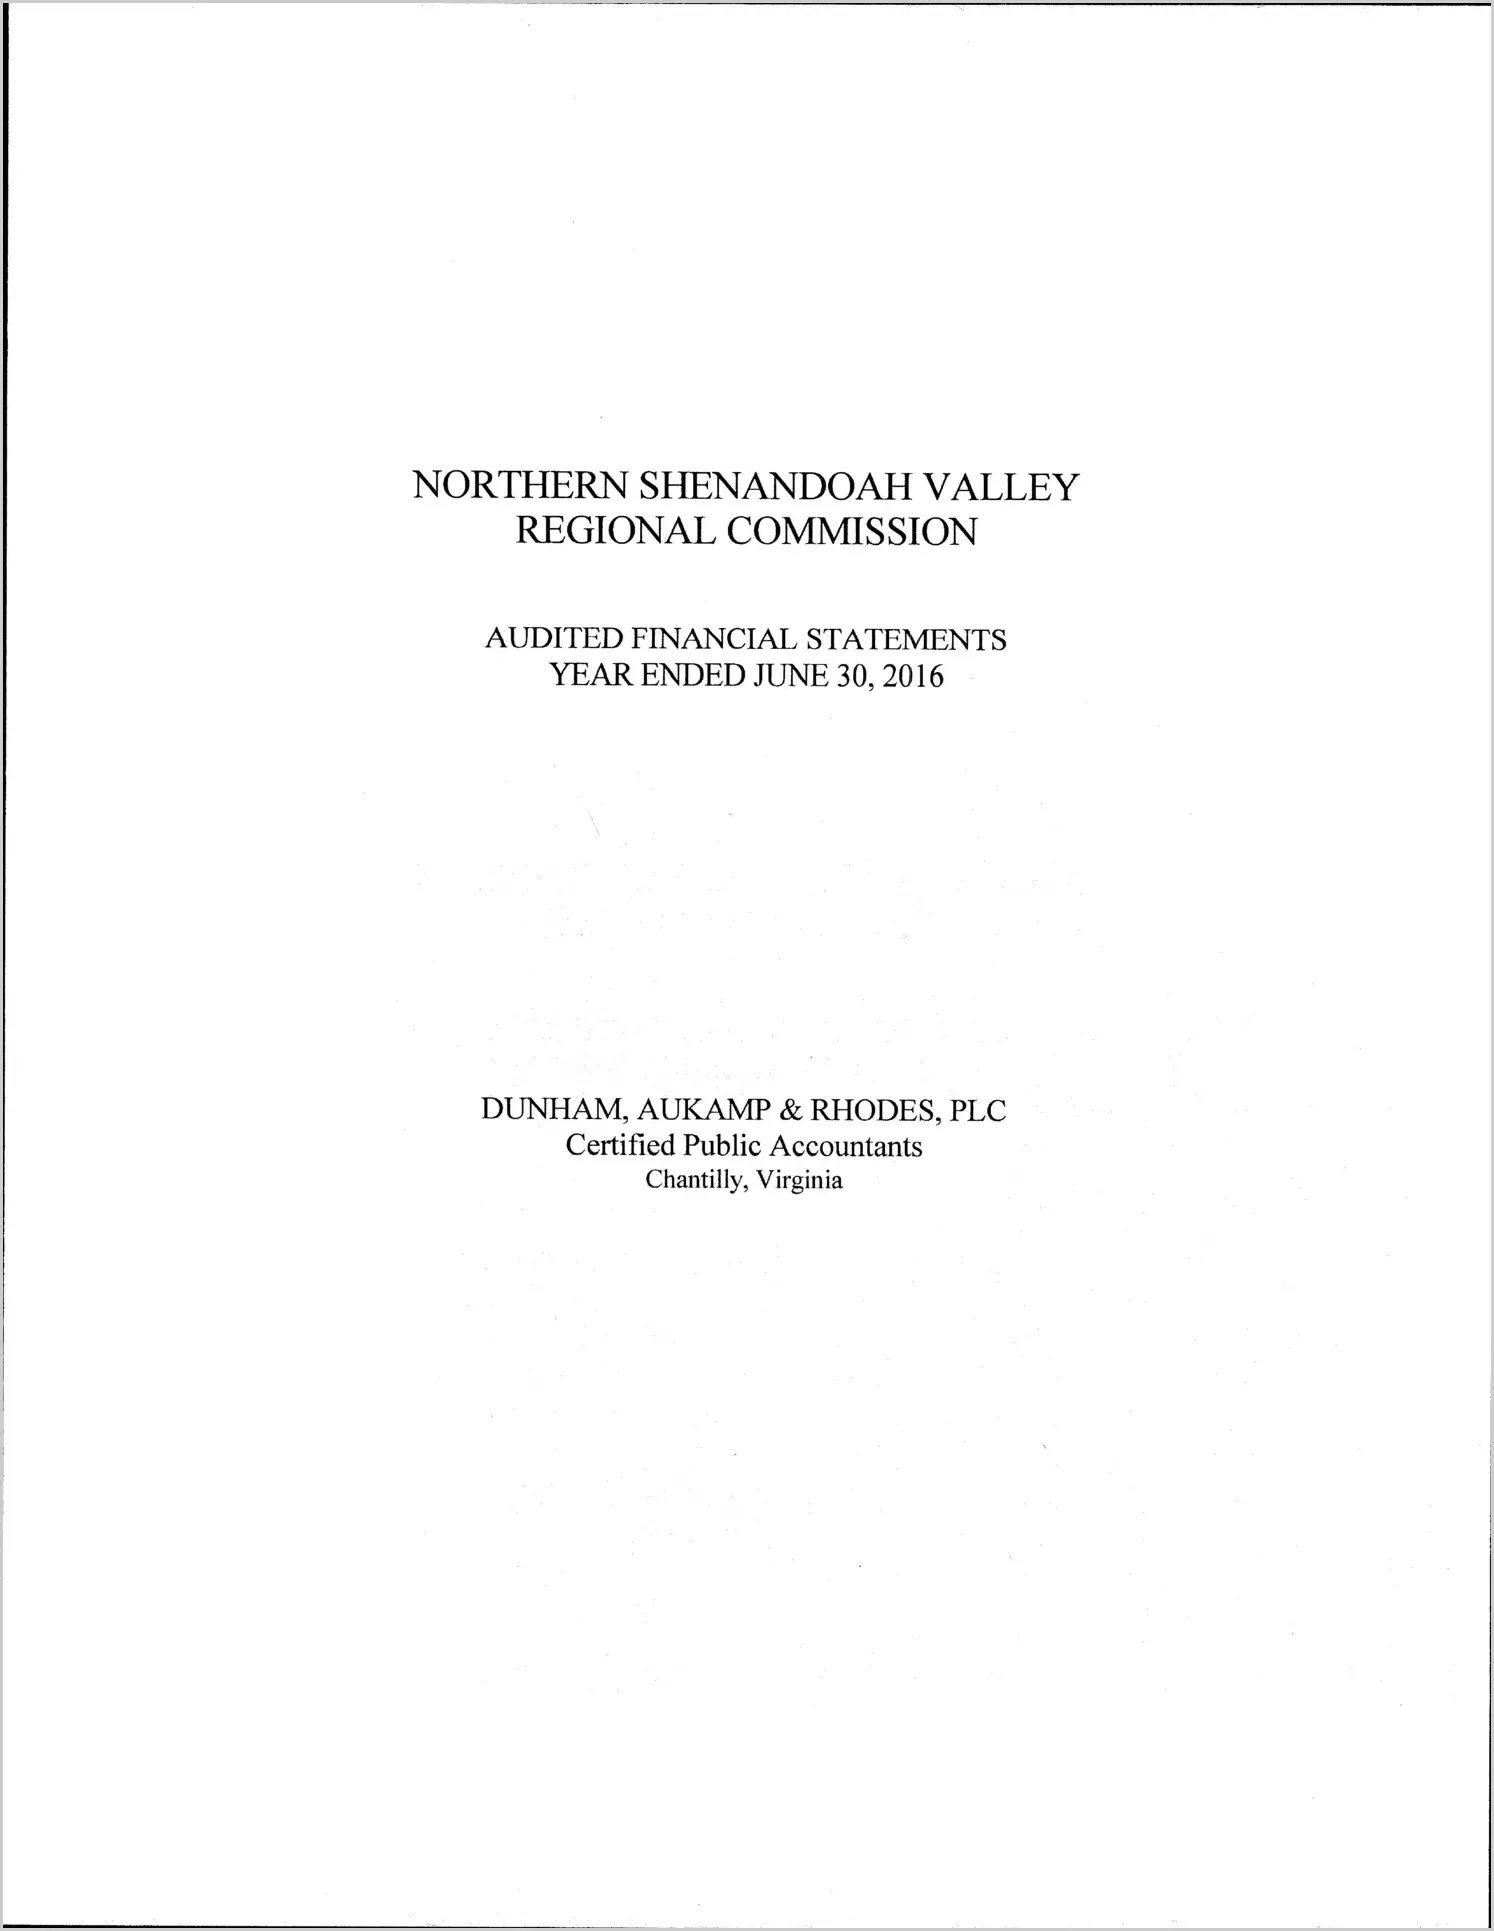 2016 ABC/Other Annual Financial Report  for Northern Shenandoah Valley Regional Commission